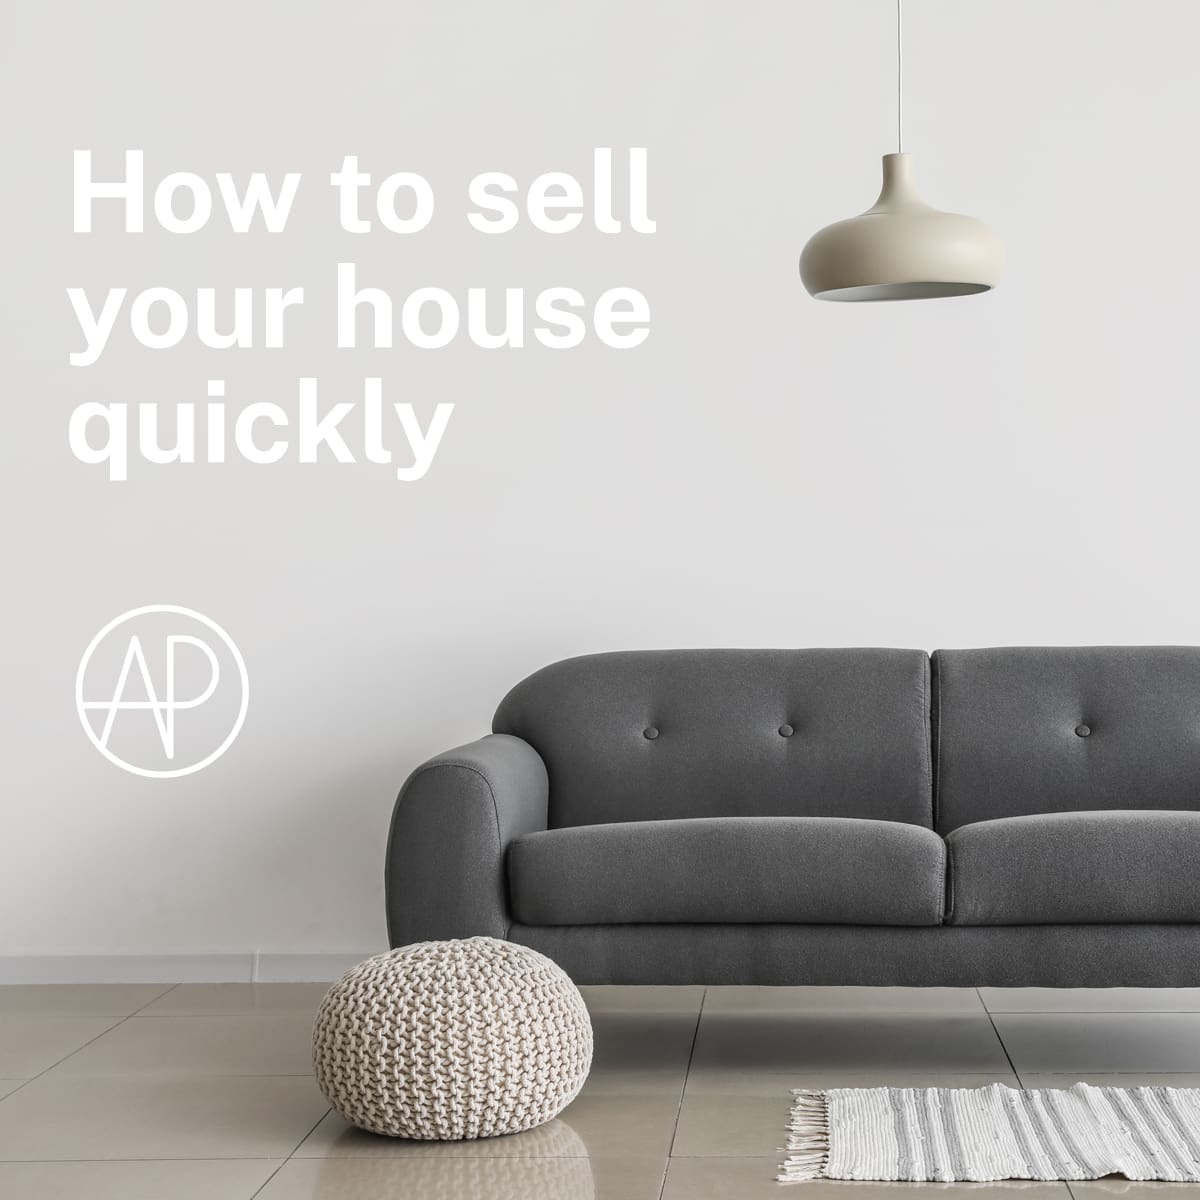 Sell your house quickly